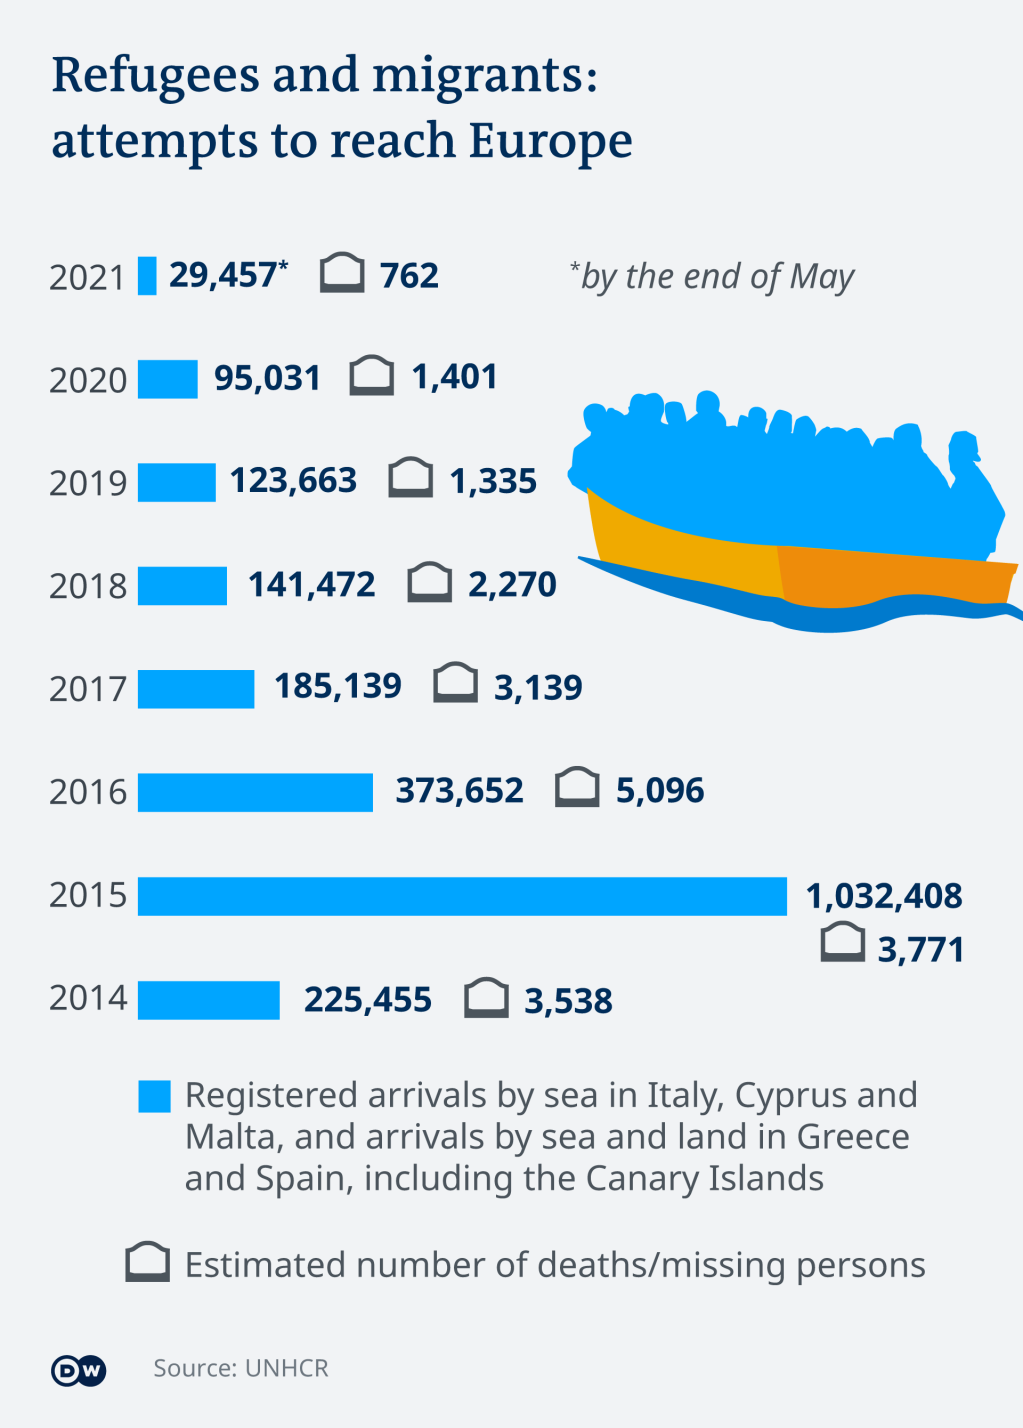 Statistics of refugee and migrant attempts to reach Europe | Credit: DW